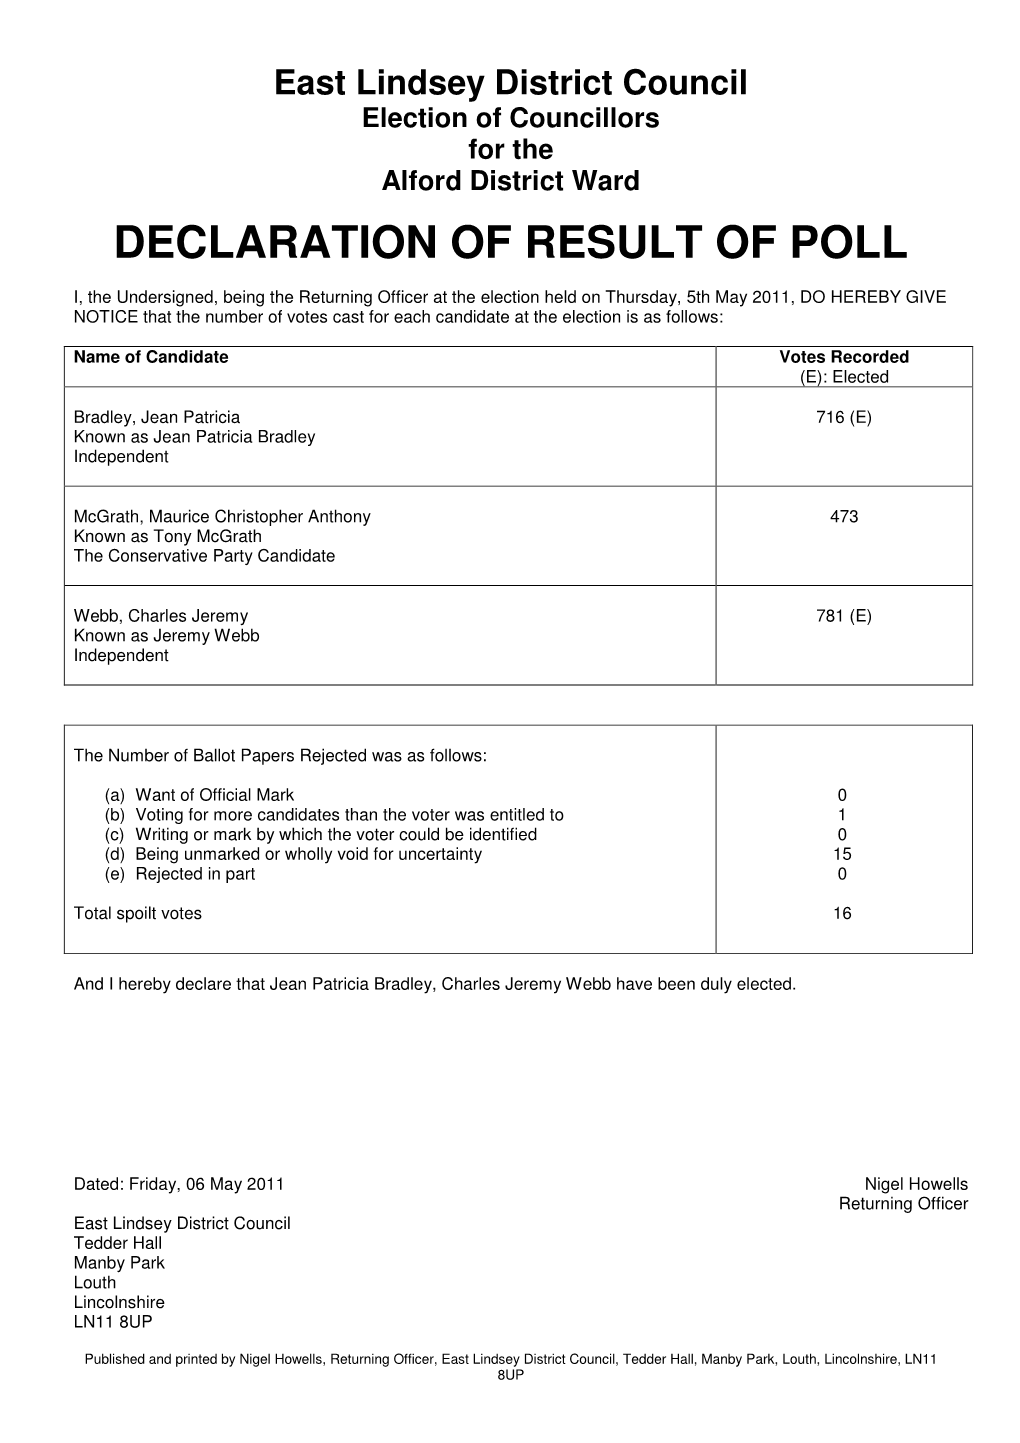 East Lindsey District Council Election of Councillor for the Burgh Le Marsh District Ward